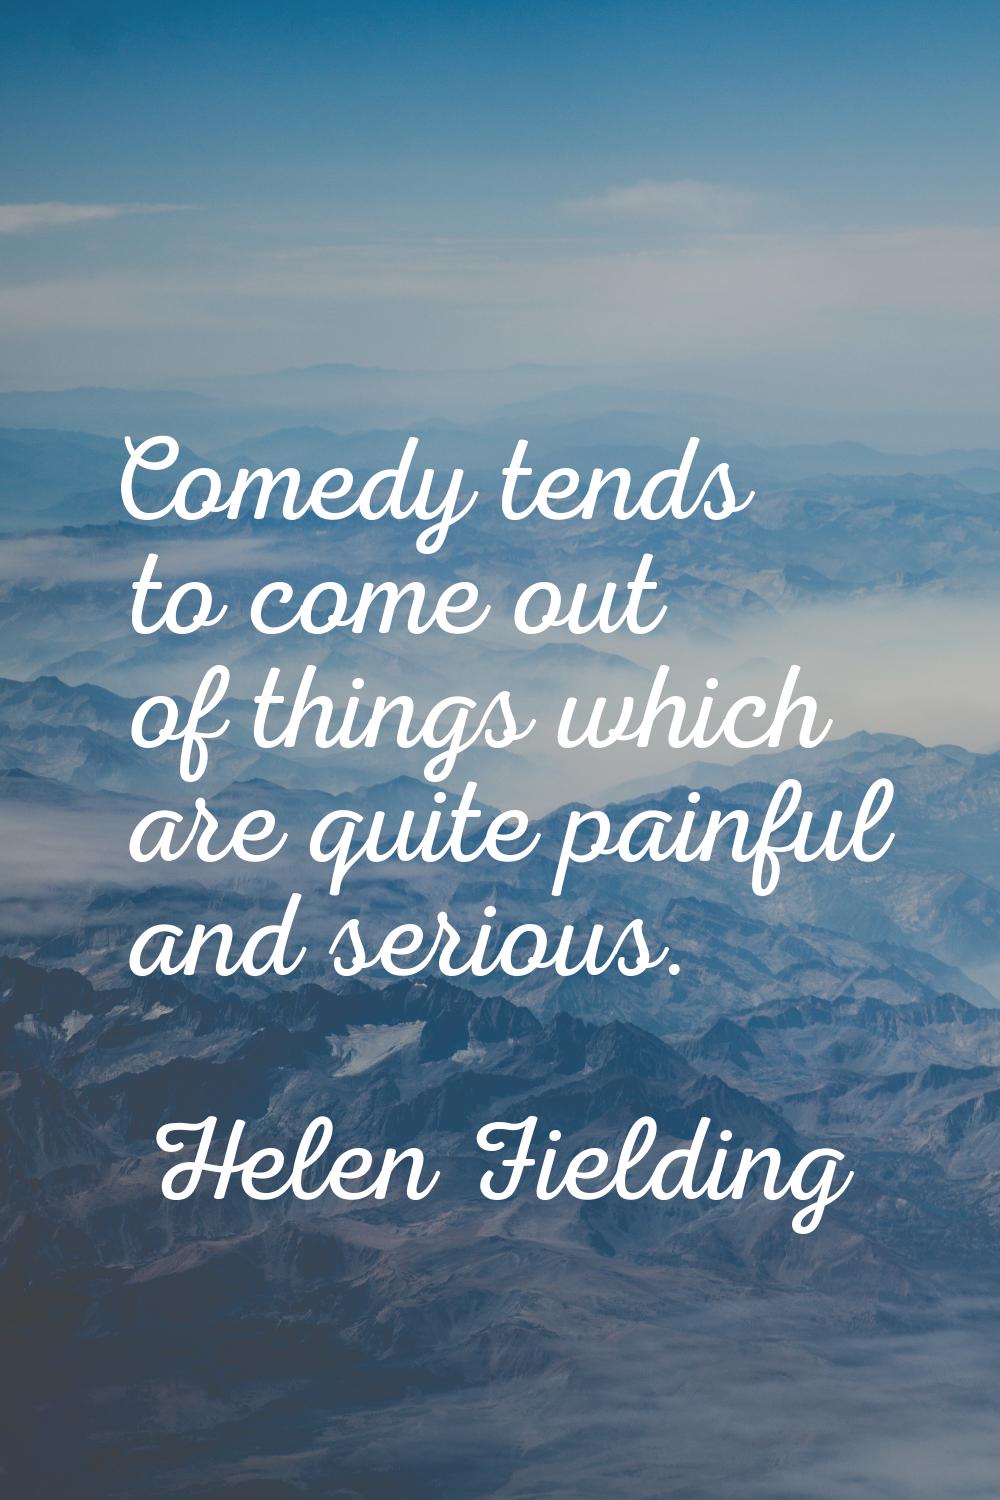 Comedy tends to come out of things which are quite painful and serious.